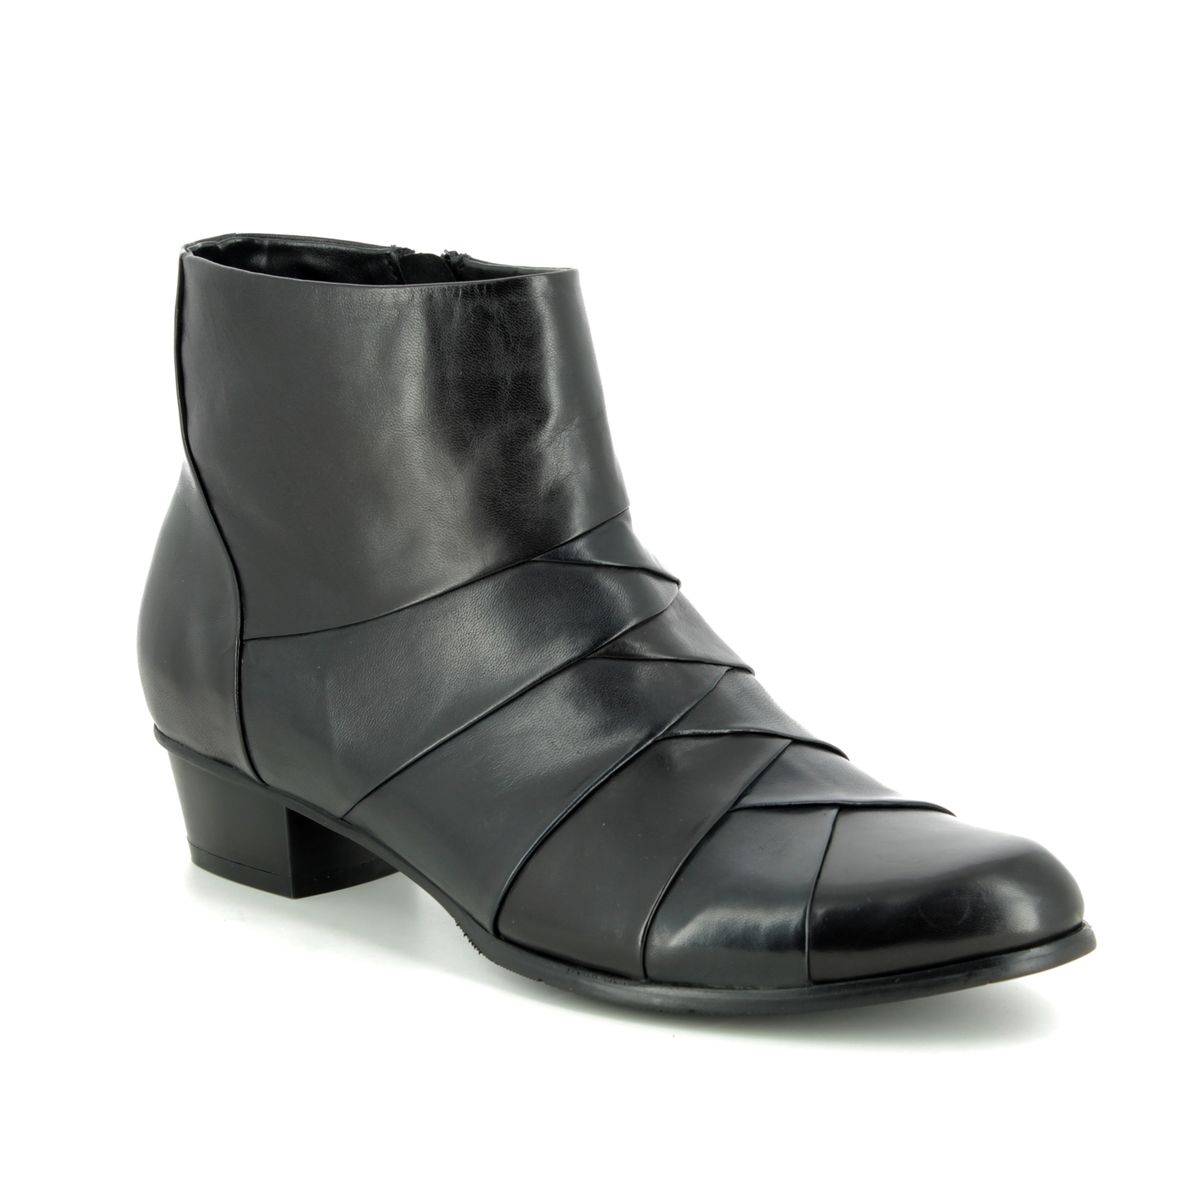 Regarde Le Ciel Stefany 172 Black Navy Womens Boots 9118-30 Ankle Boots In Soft Black Navy Leather In Size 37